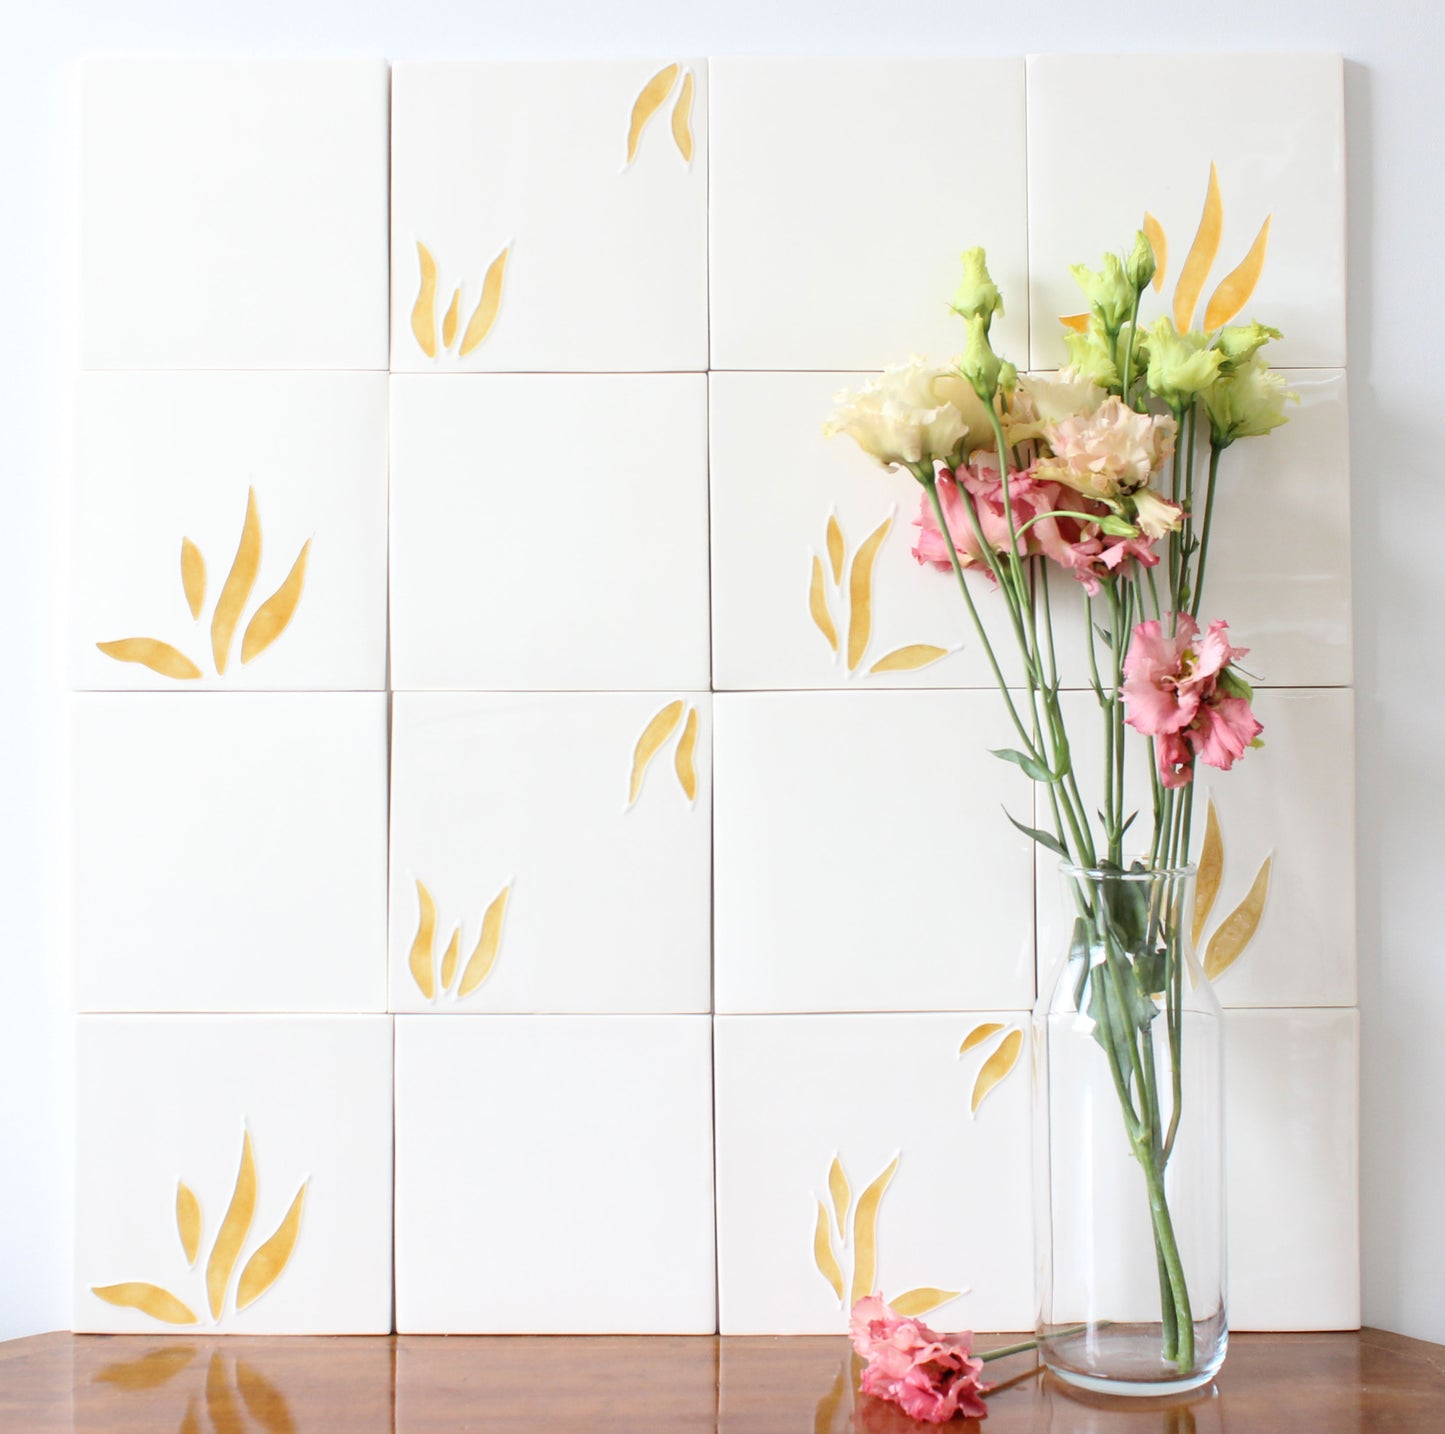 Pomegranate hand painted tiles in Honey